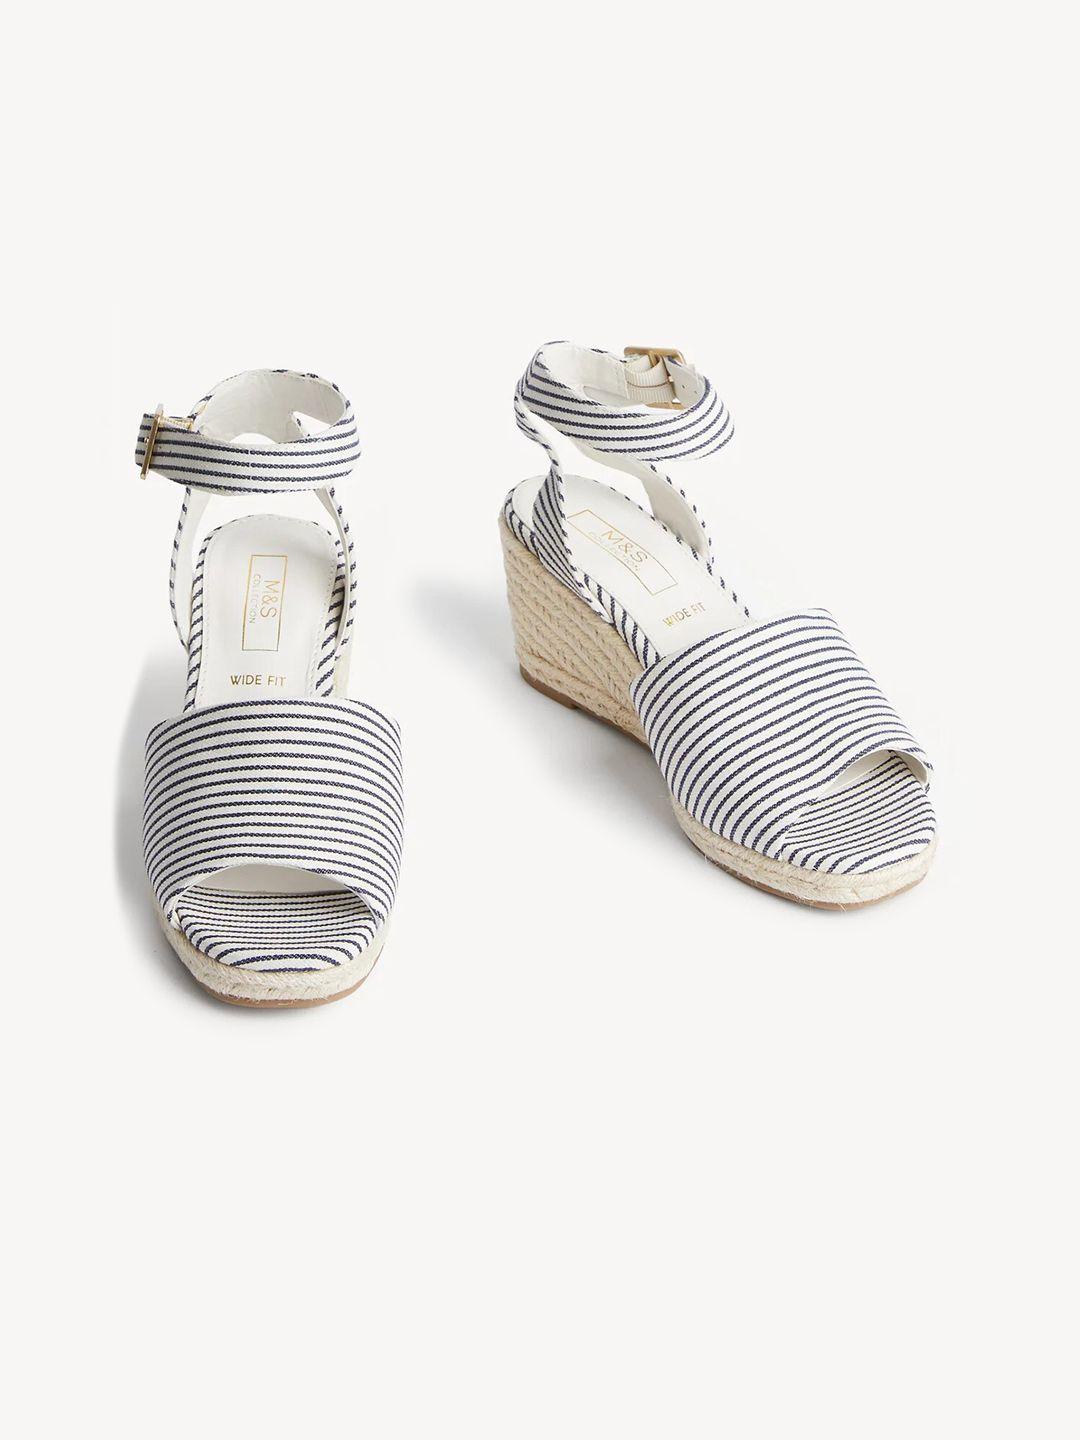 marks-&-spencer-striped-open-toe-wedges-with-ankle-loop